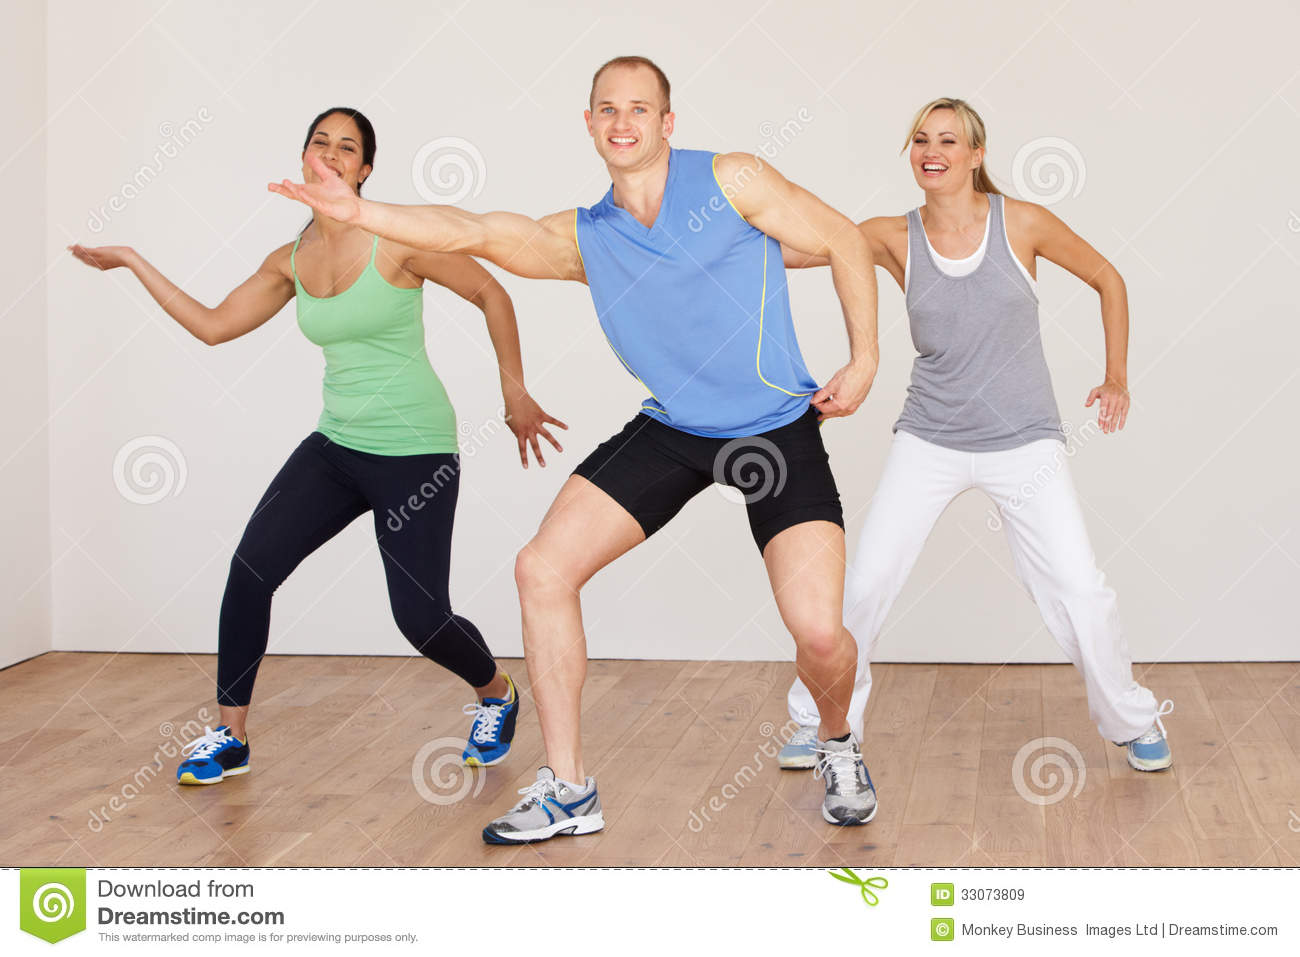 Group Of People Exercising In Dance Studio Royalty Free Stock Images    